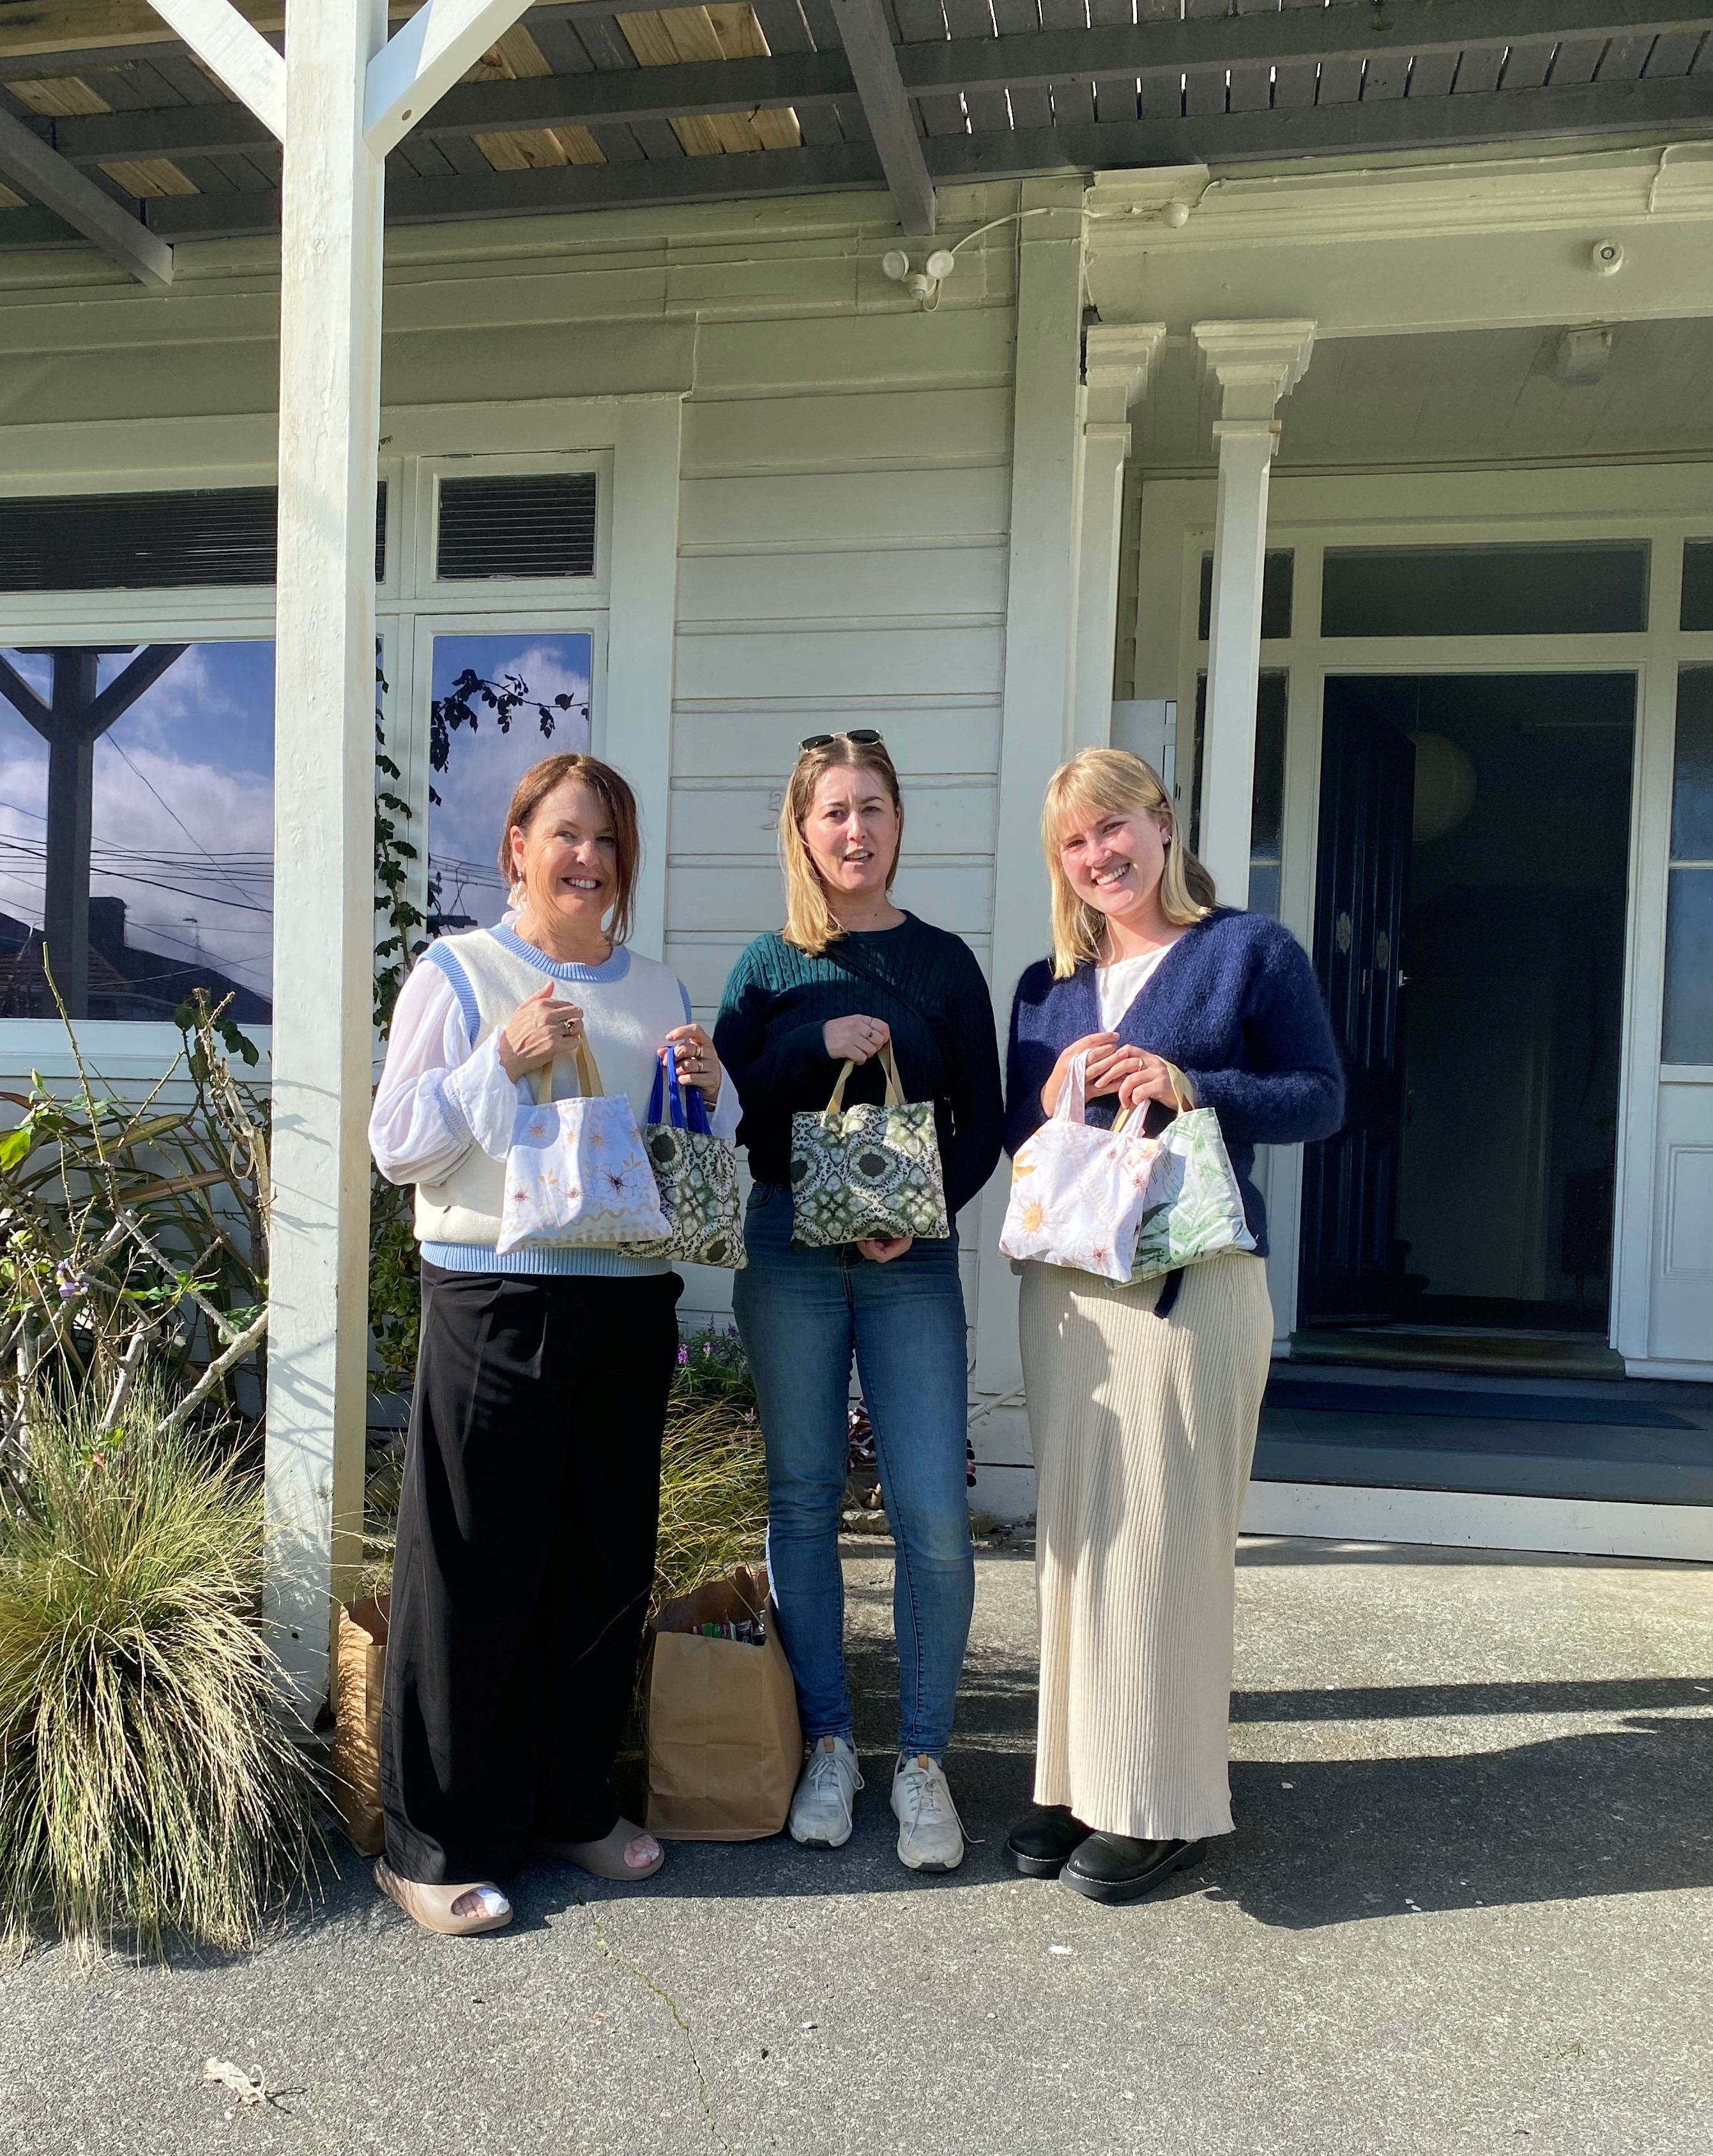 Kate, Natalie, and Ebba with gift bags donated by Altrusa Ohariu.